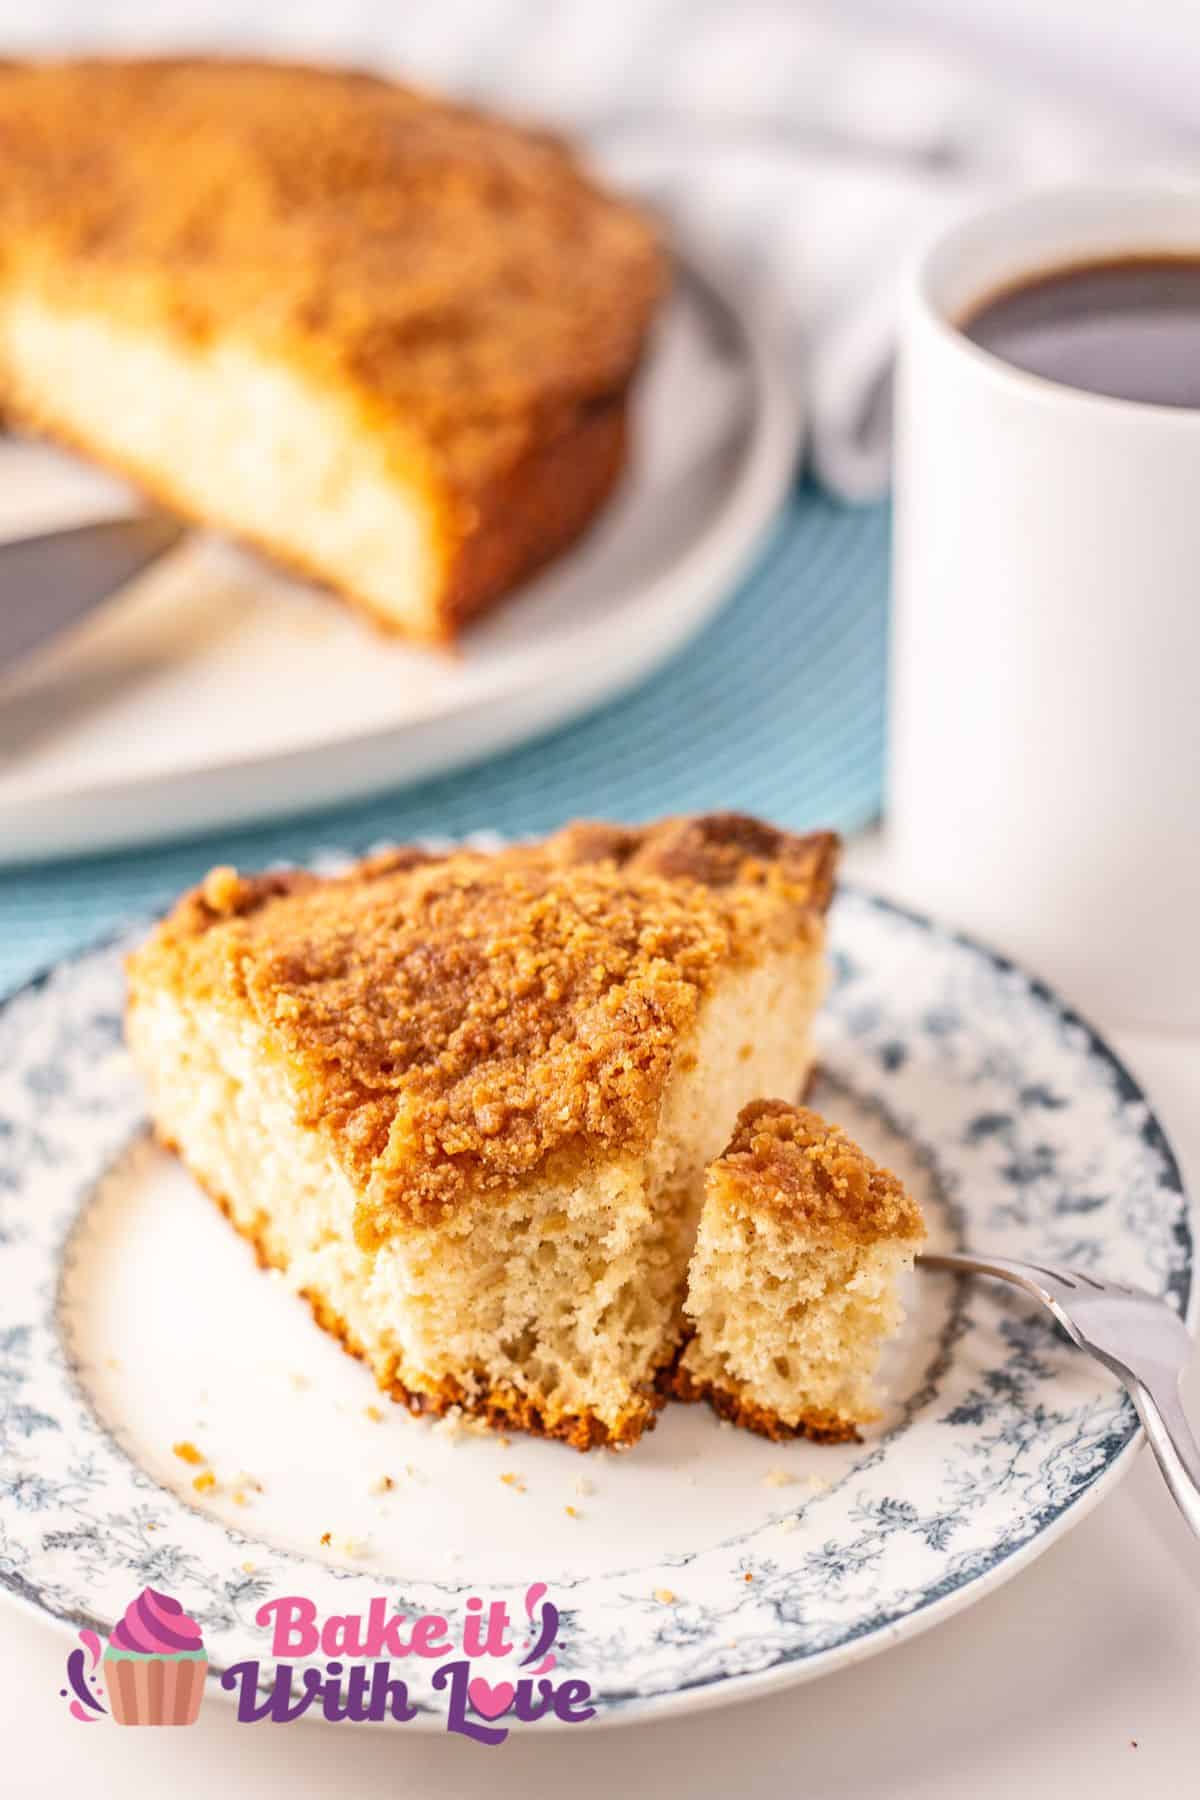 Sliced Bisquick coffee cake served on floral plate with a bite forked to the side.